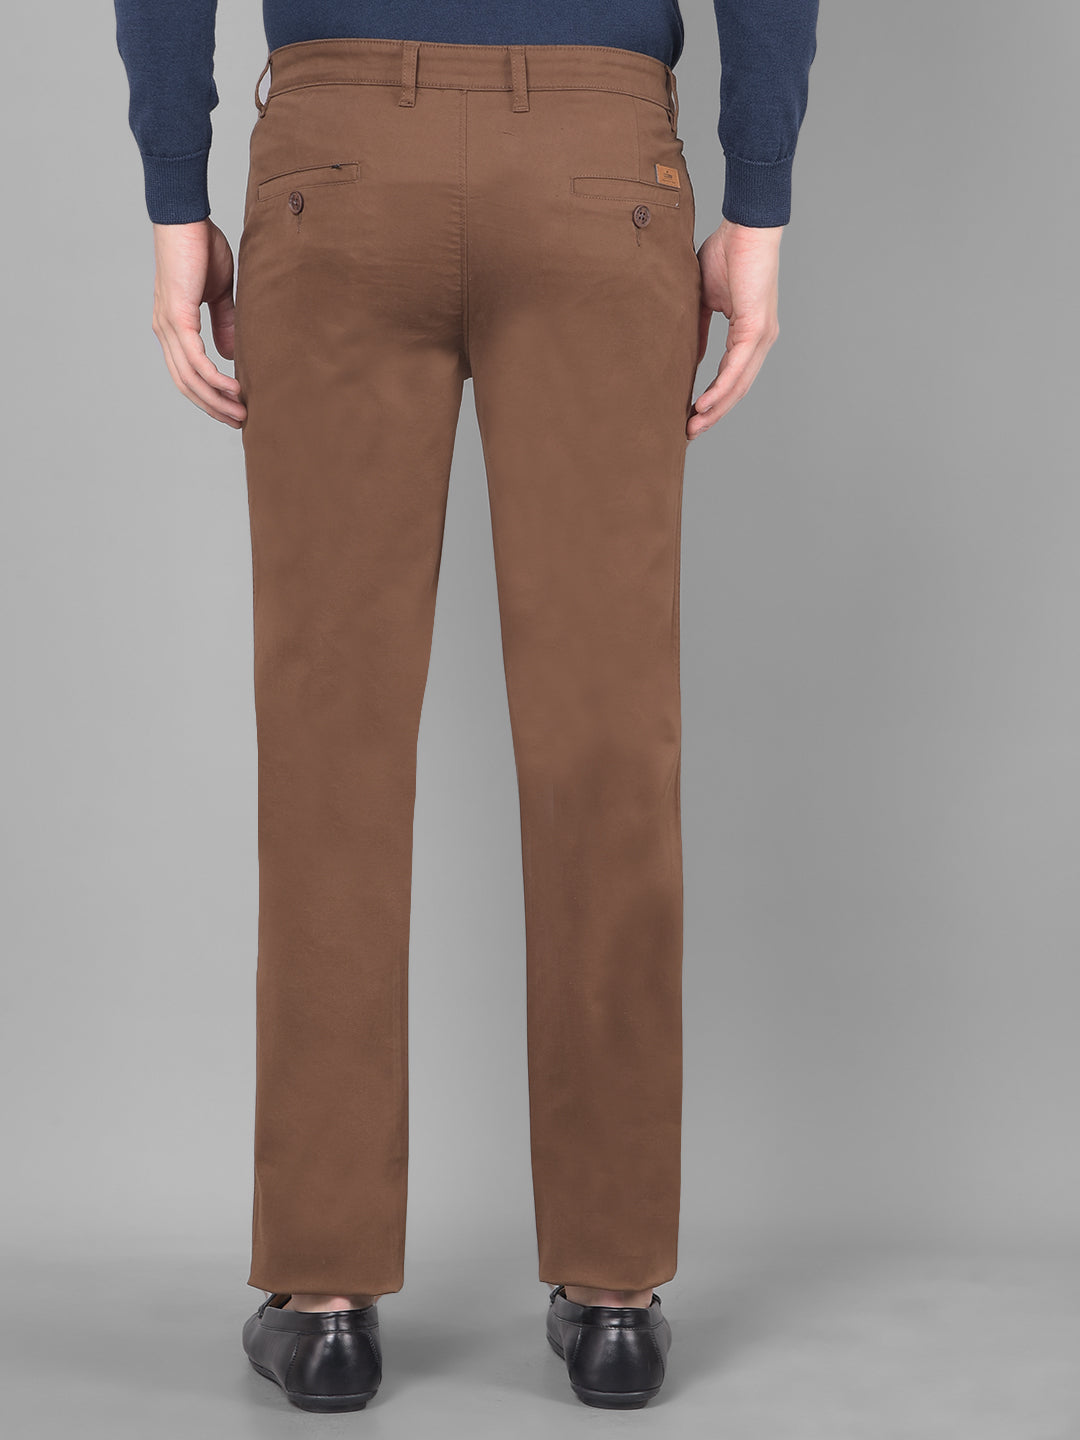 Buy Copper Chino | Casual Brown Solid Chinos for Men Online | Andamen